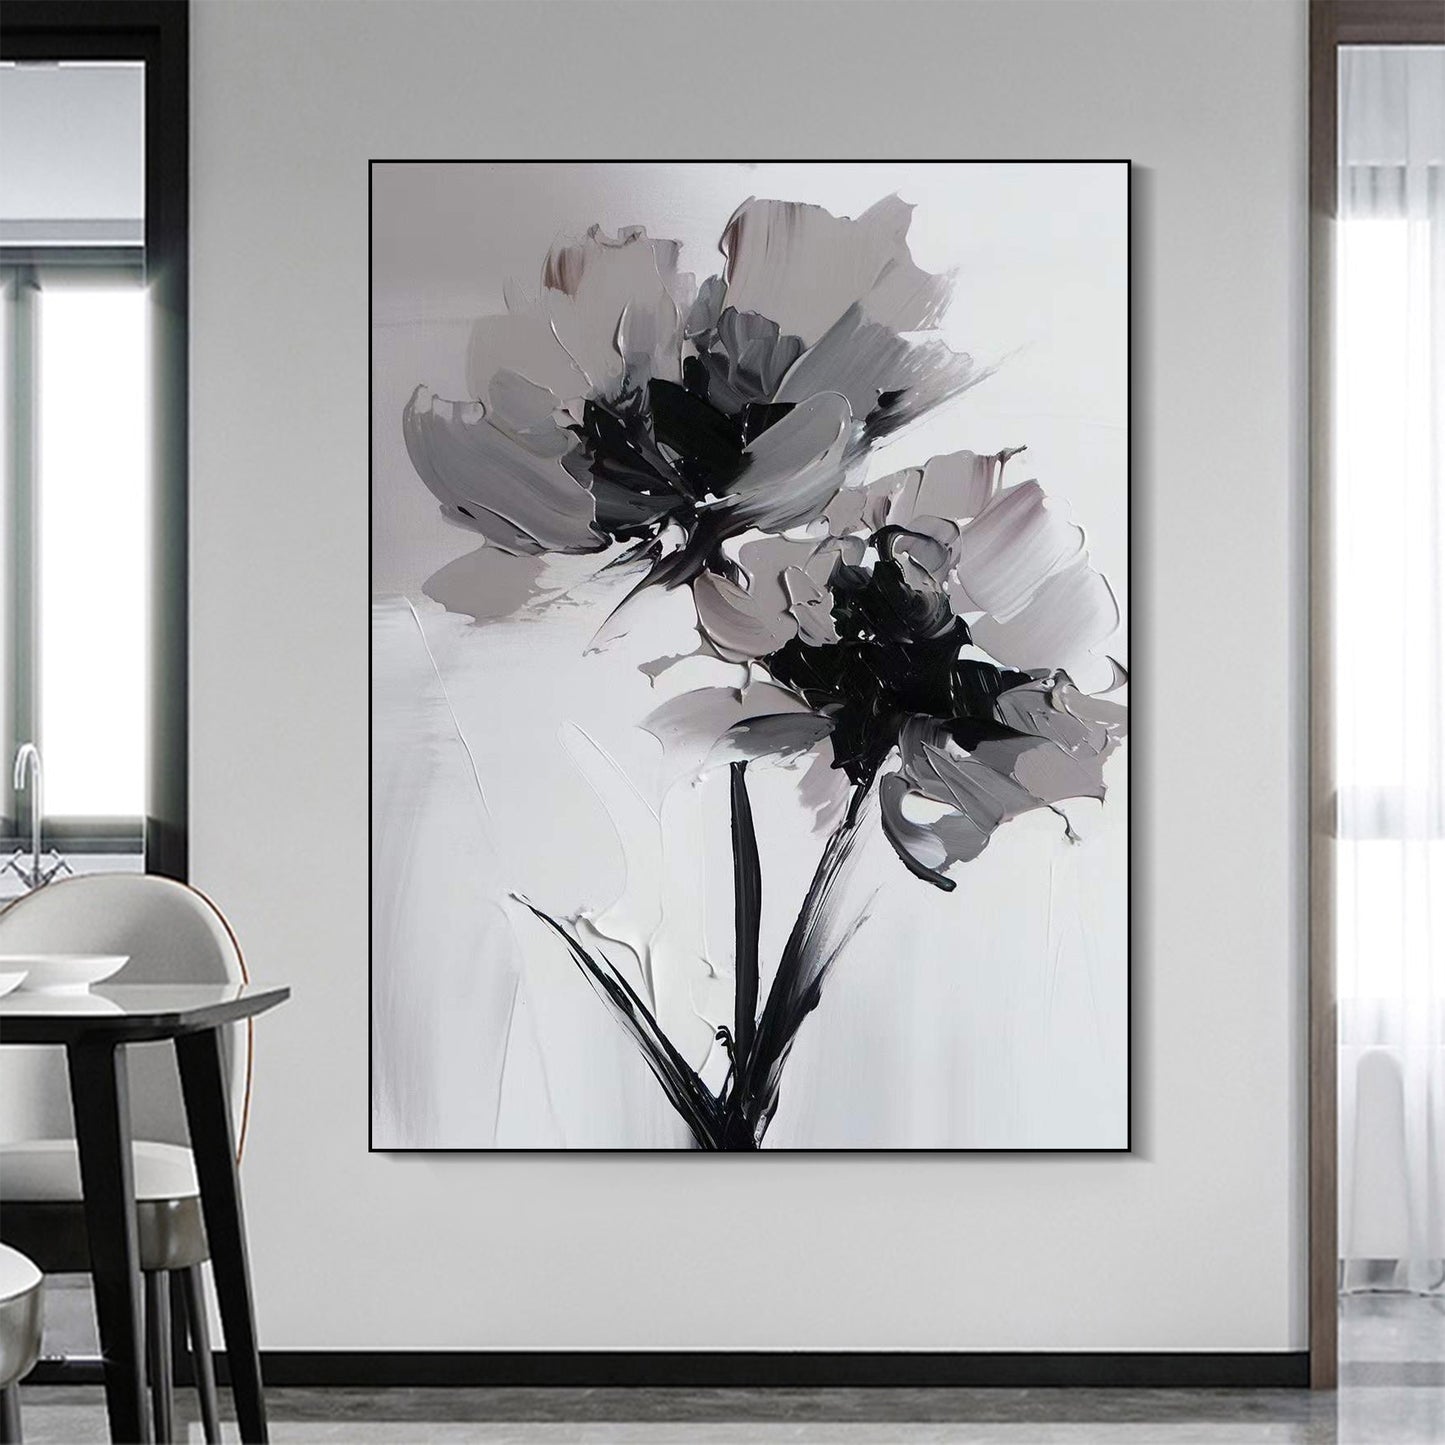 FLOWER PAINTING, HAND-PAINTED CANVAS, WHITE BLACK FLOWER